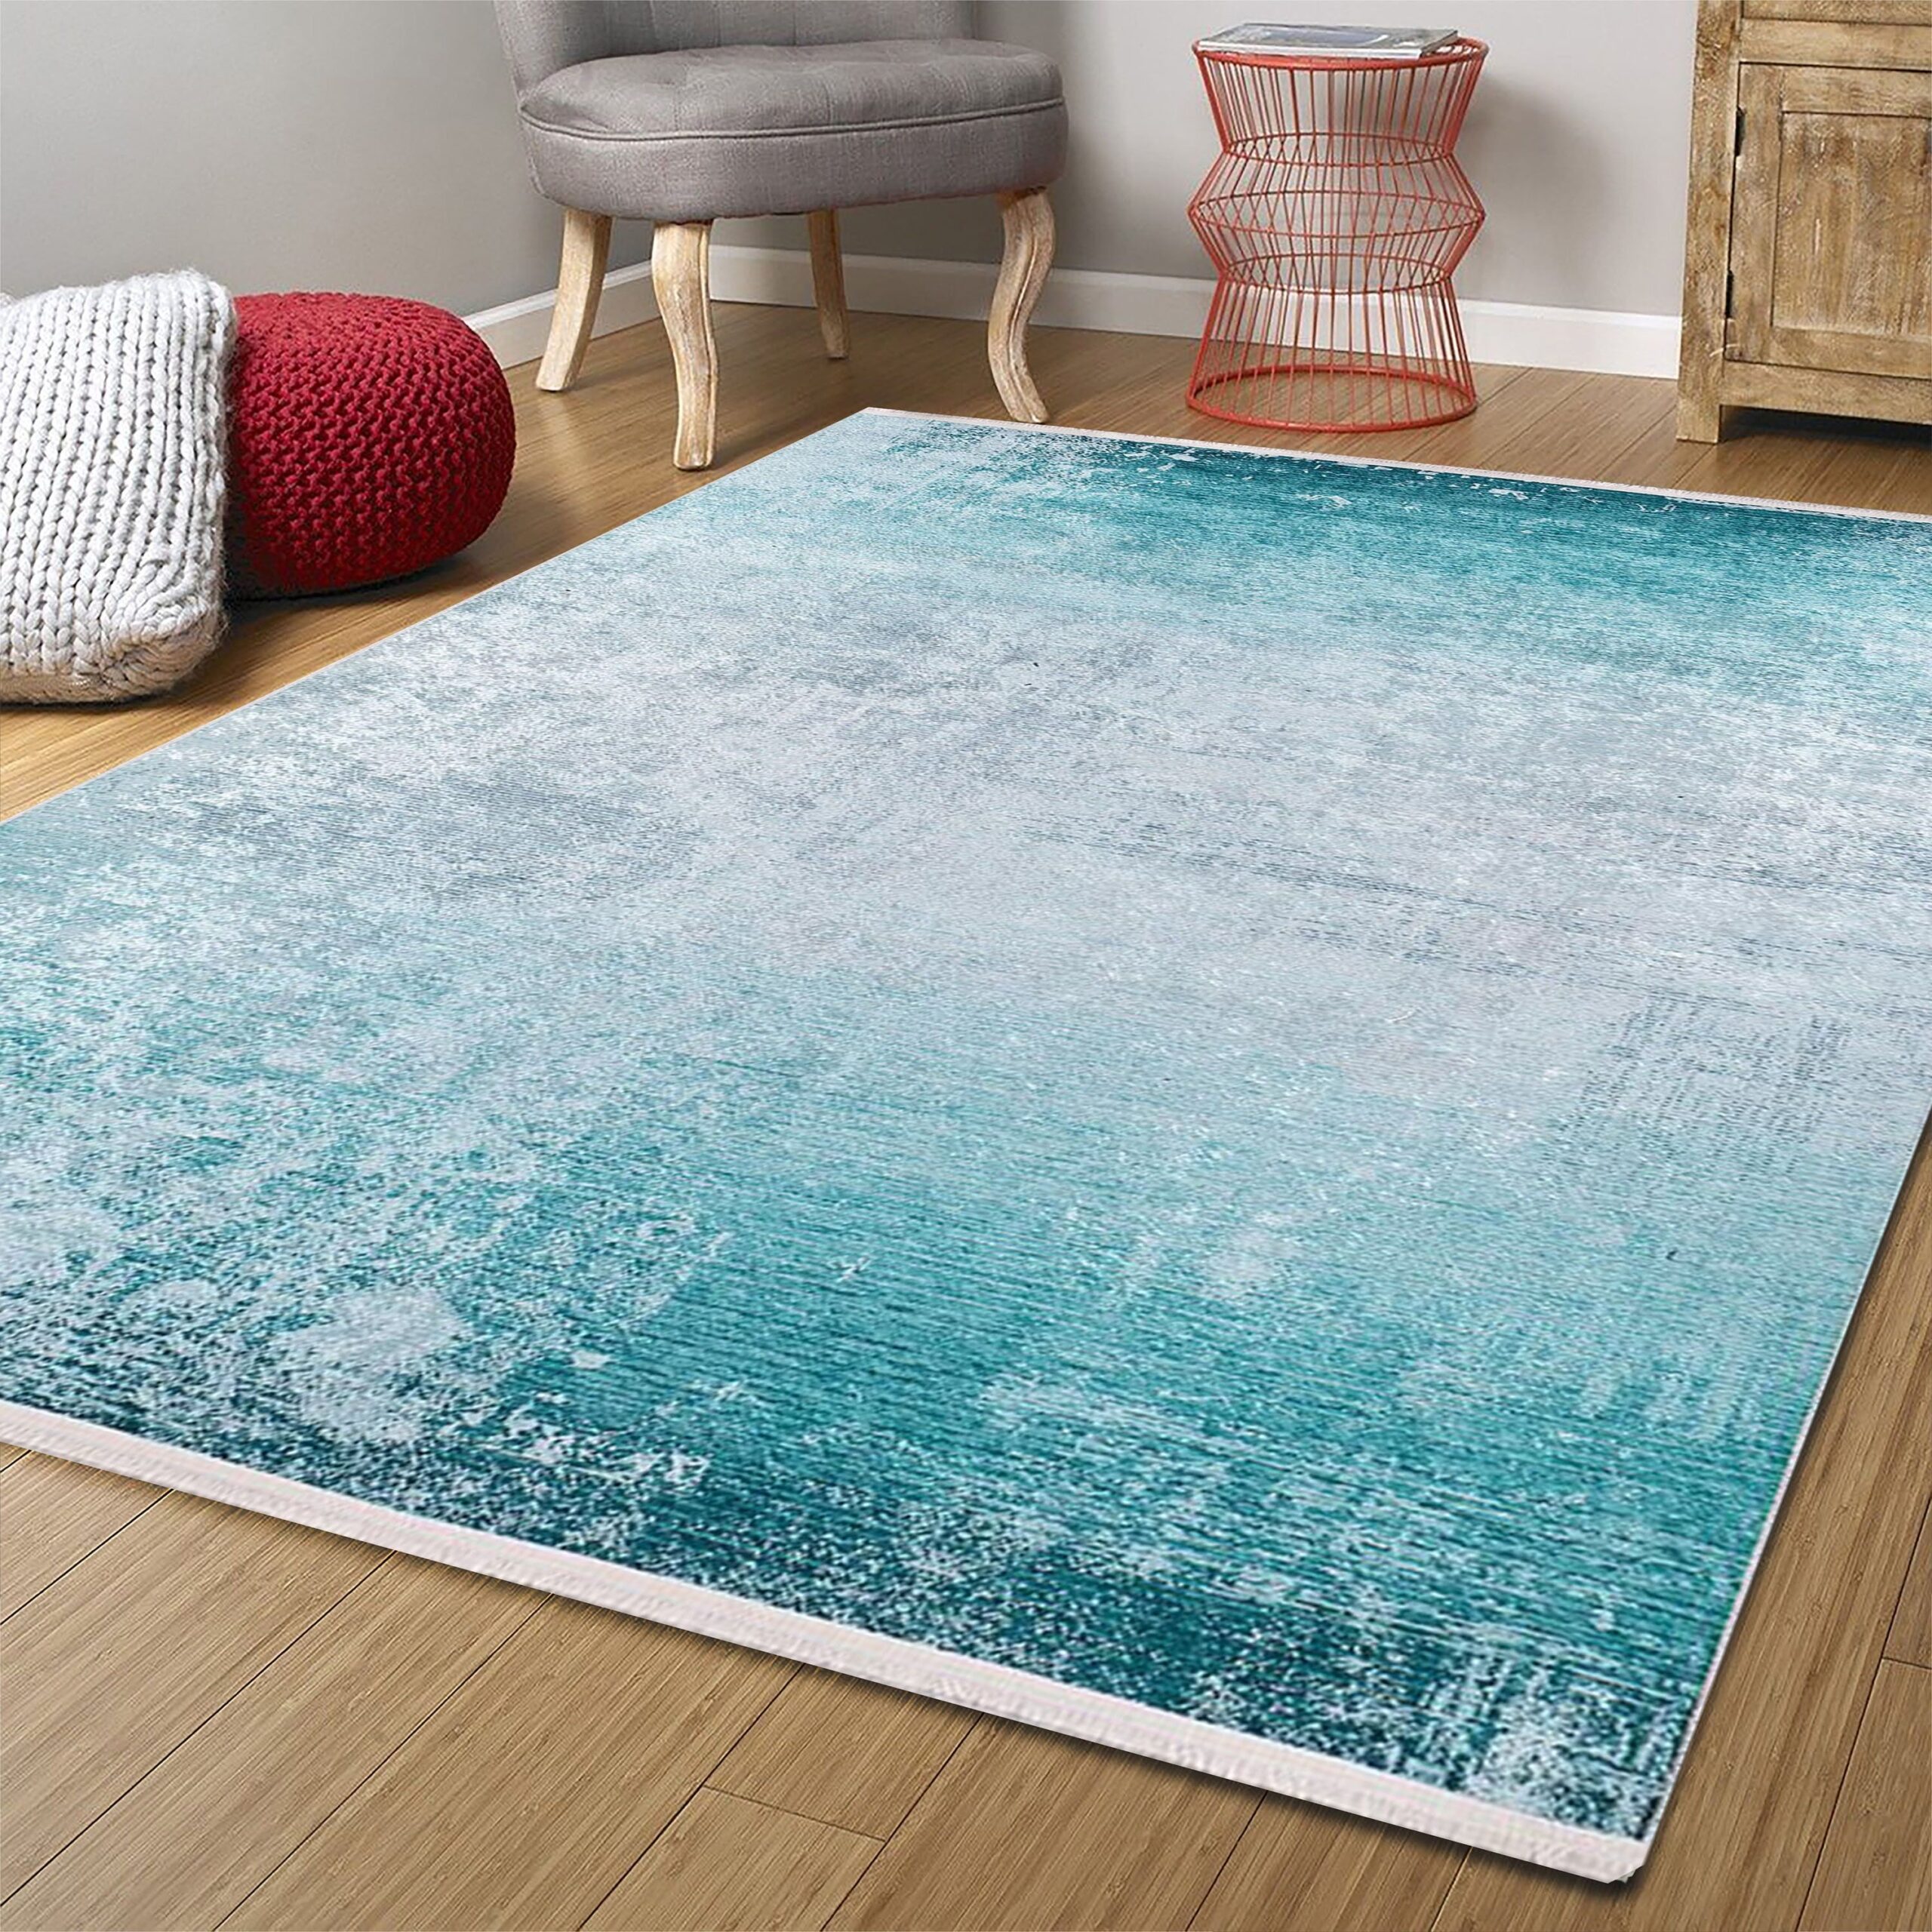 Turquoise rug- a vibrant color for room
décor